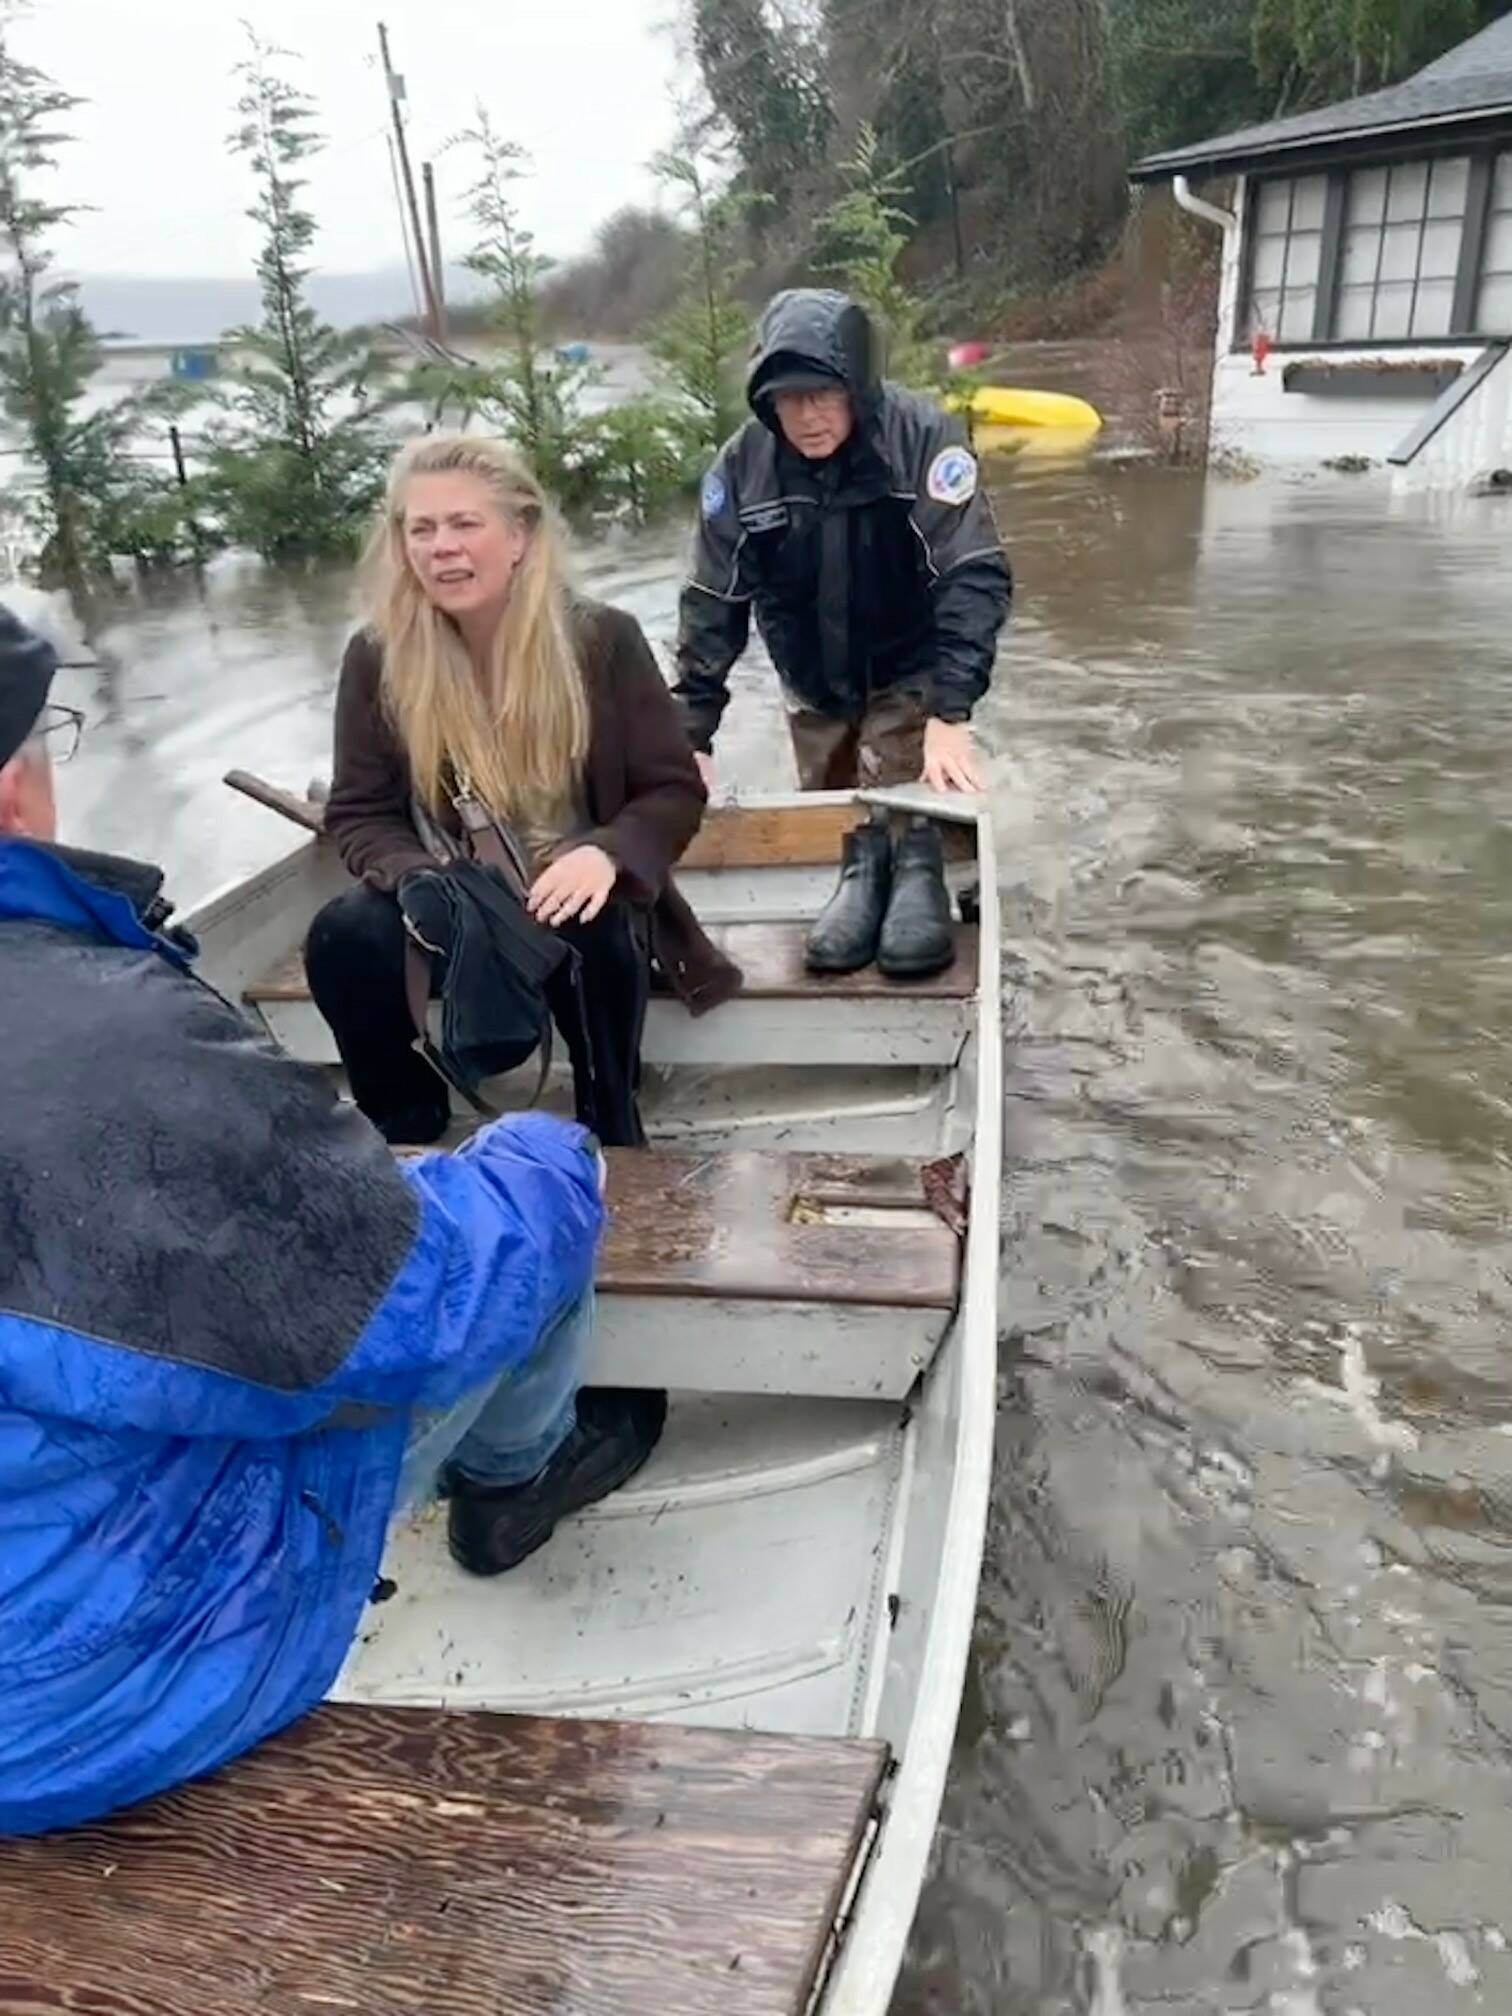 Central Whidbey Island Fire and Rescue firefighters rescue a woman who was marooned in her flooded home in Greenbank. (Photo provided)